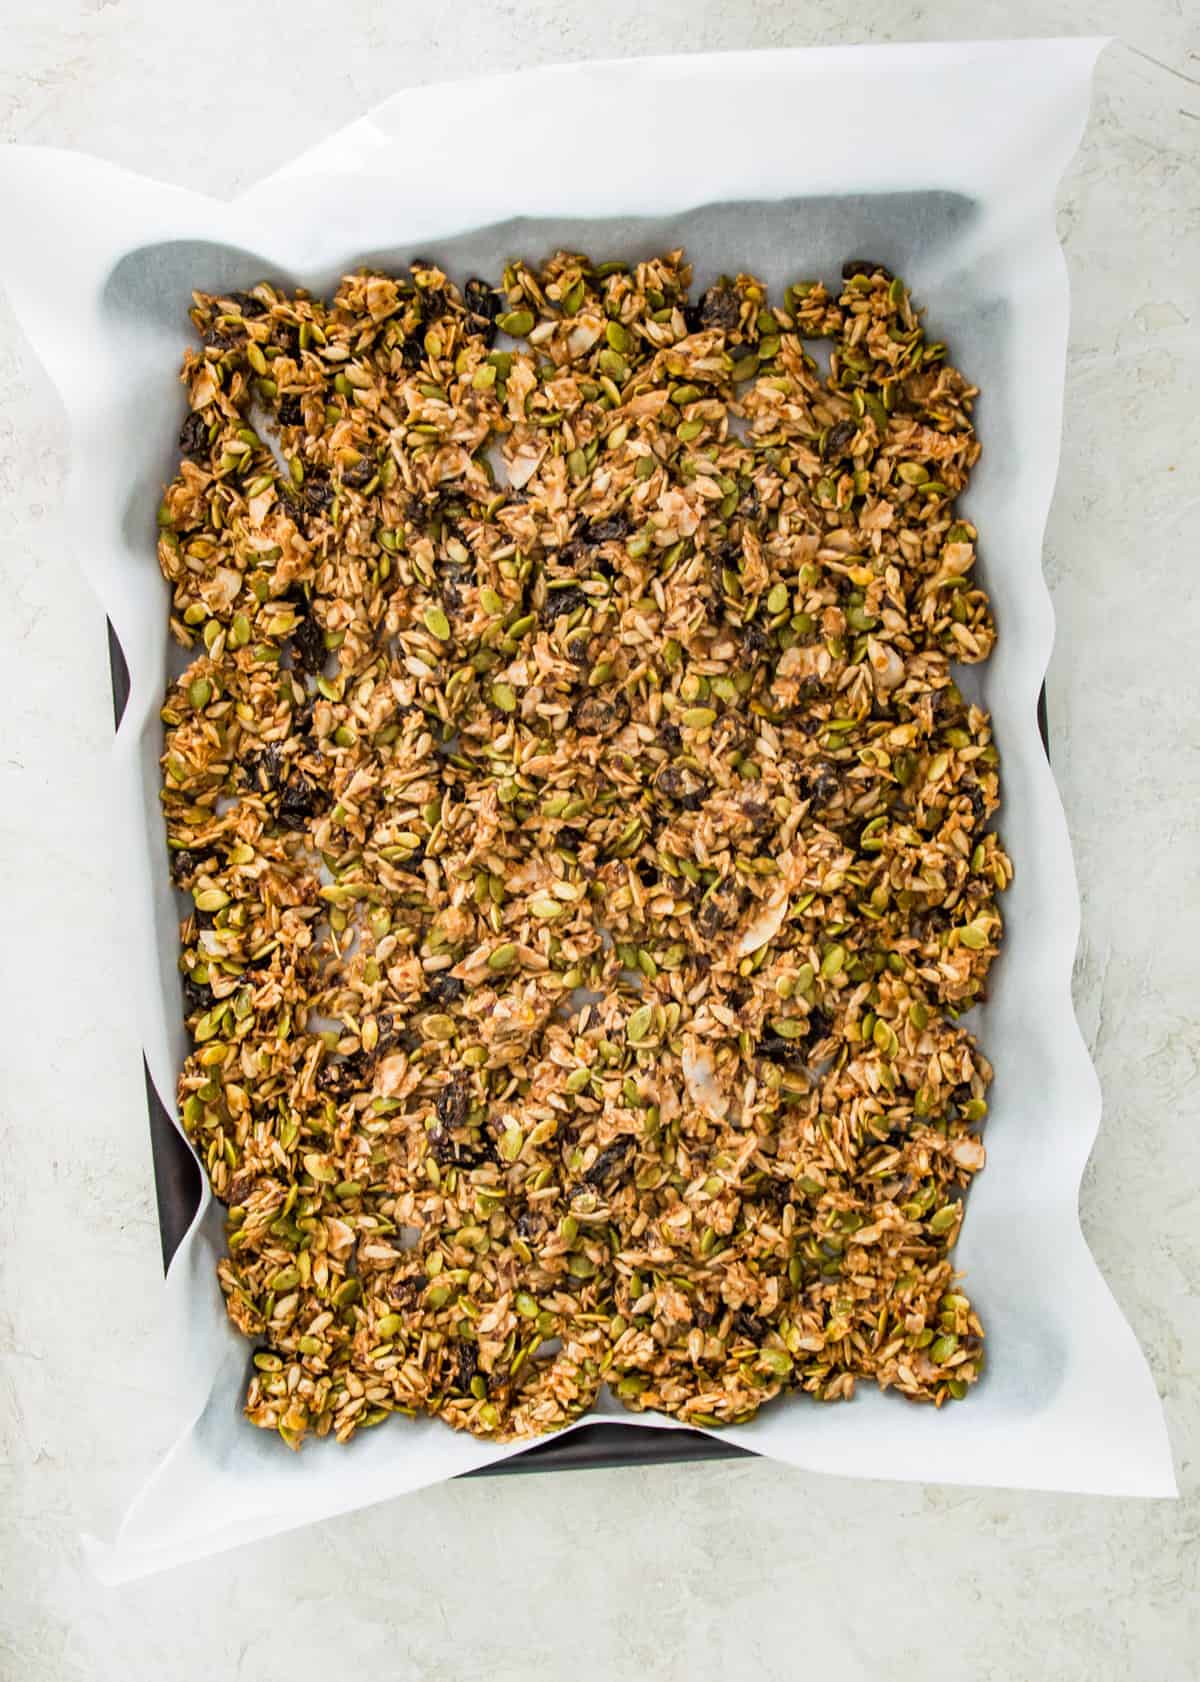 A baking sheet lined with parchment paper with granola spread out on it.